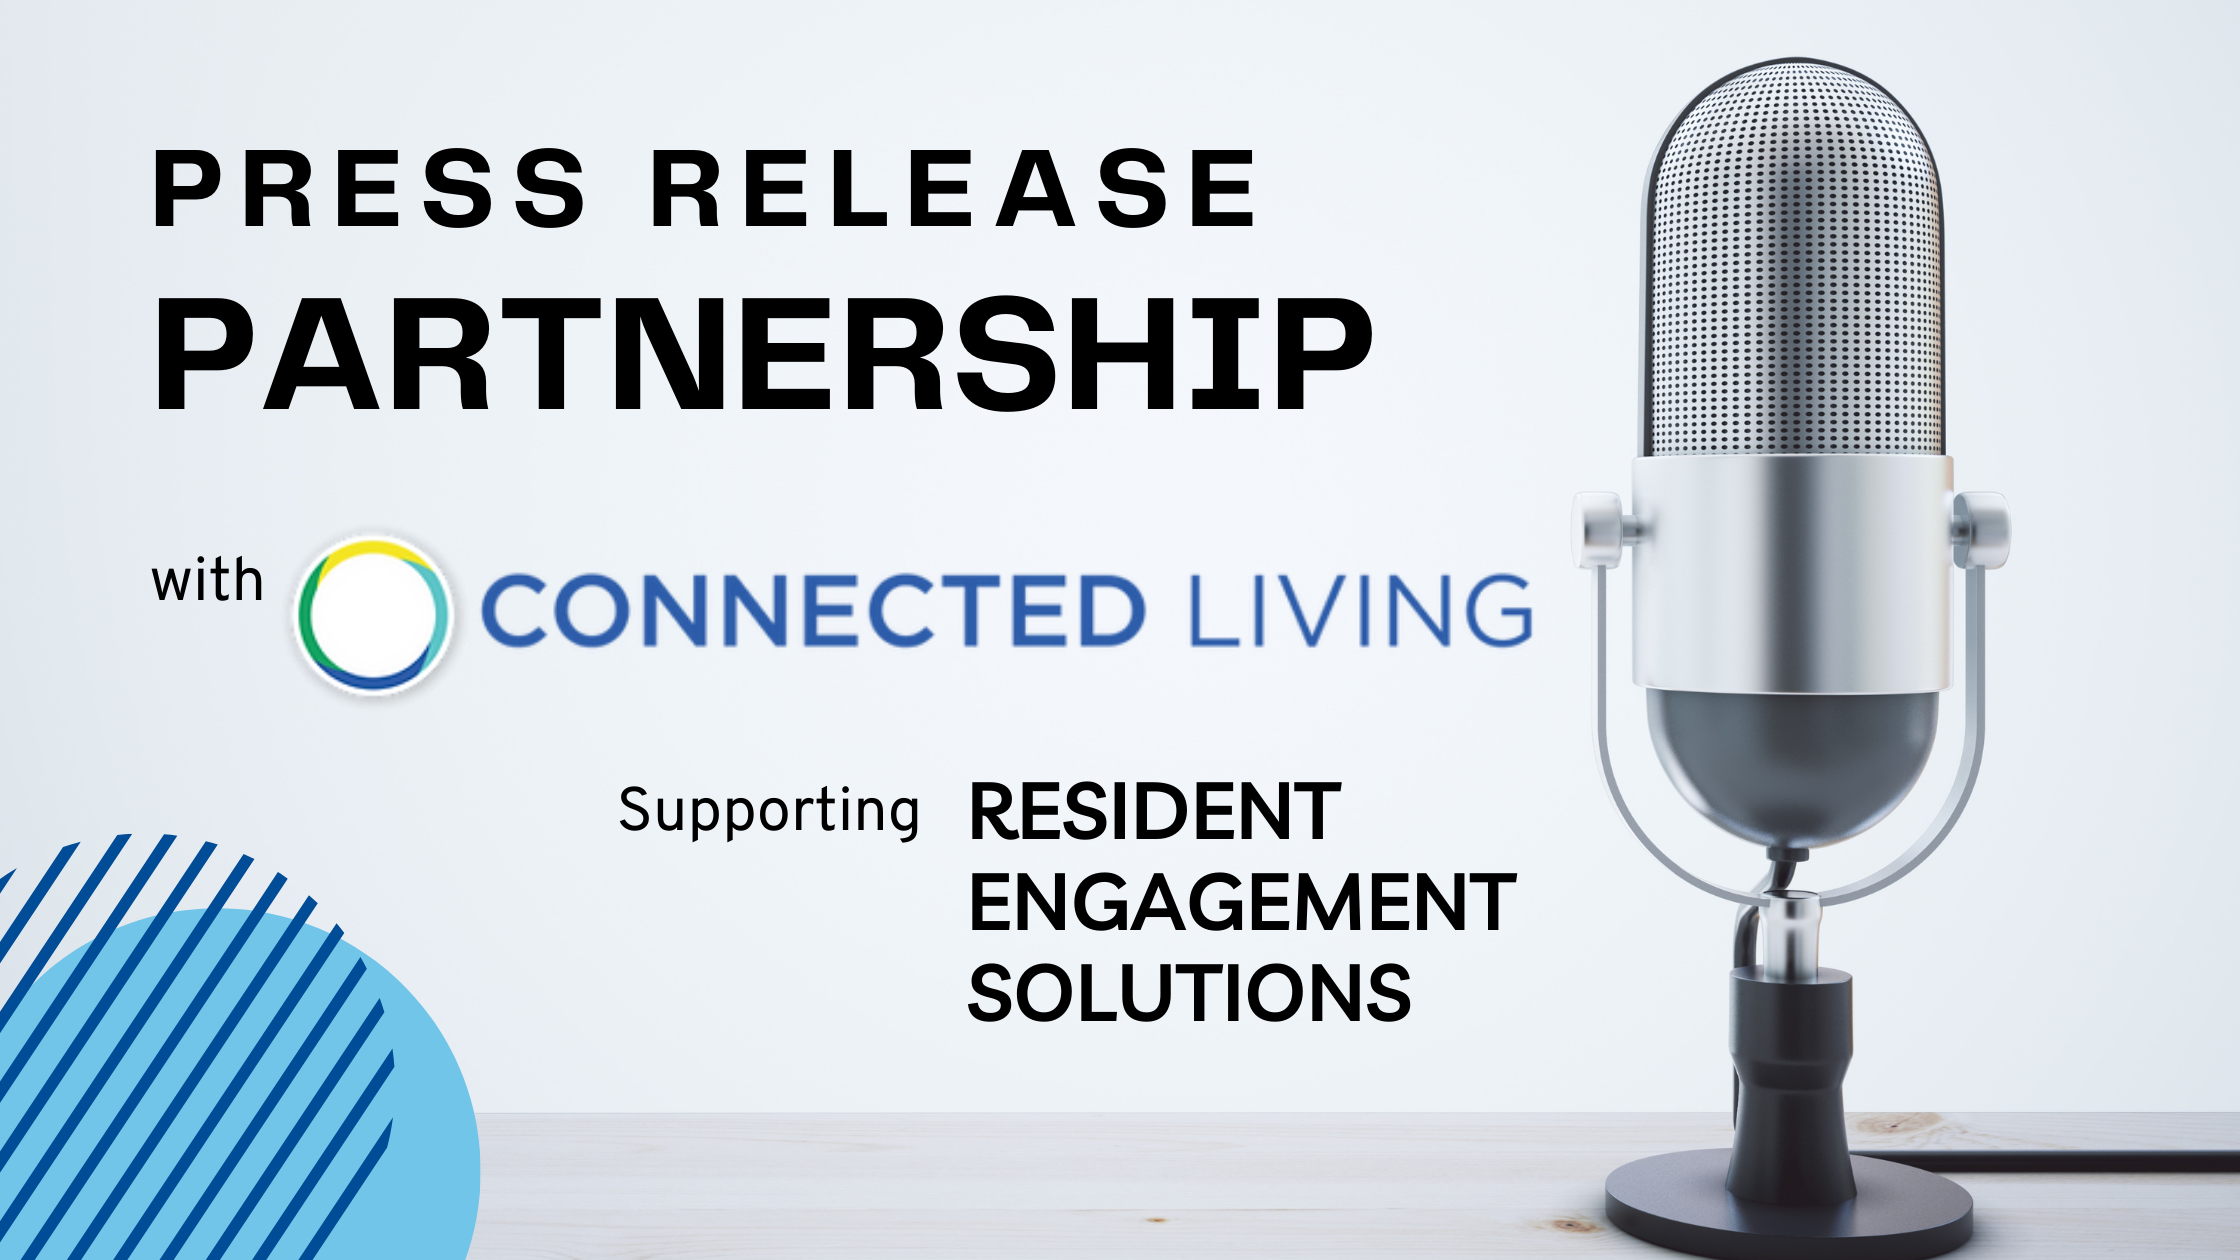 Prime Care Technologies Partners with Connected Living to Enhance Support of Resident Engagement Solutions